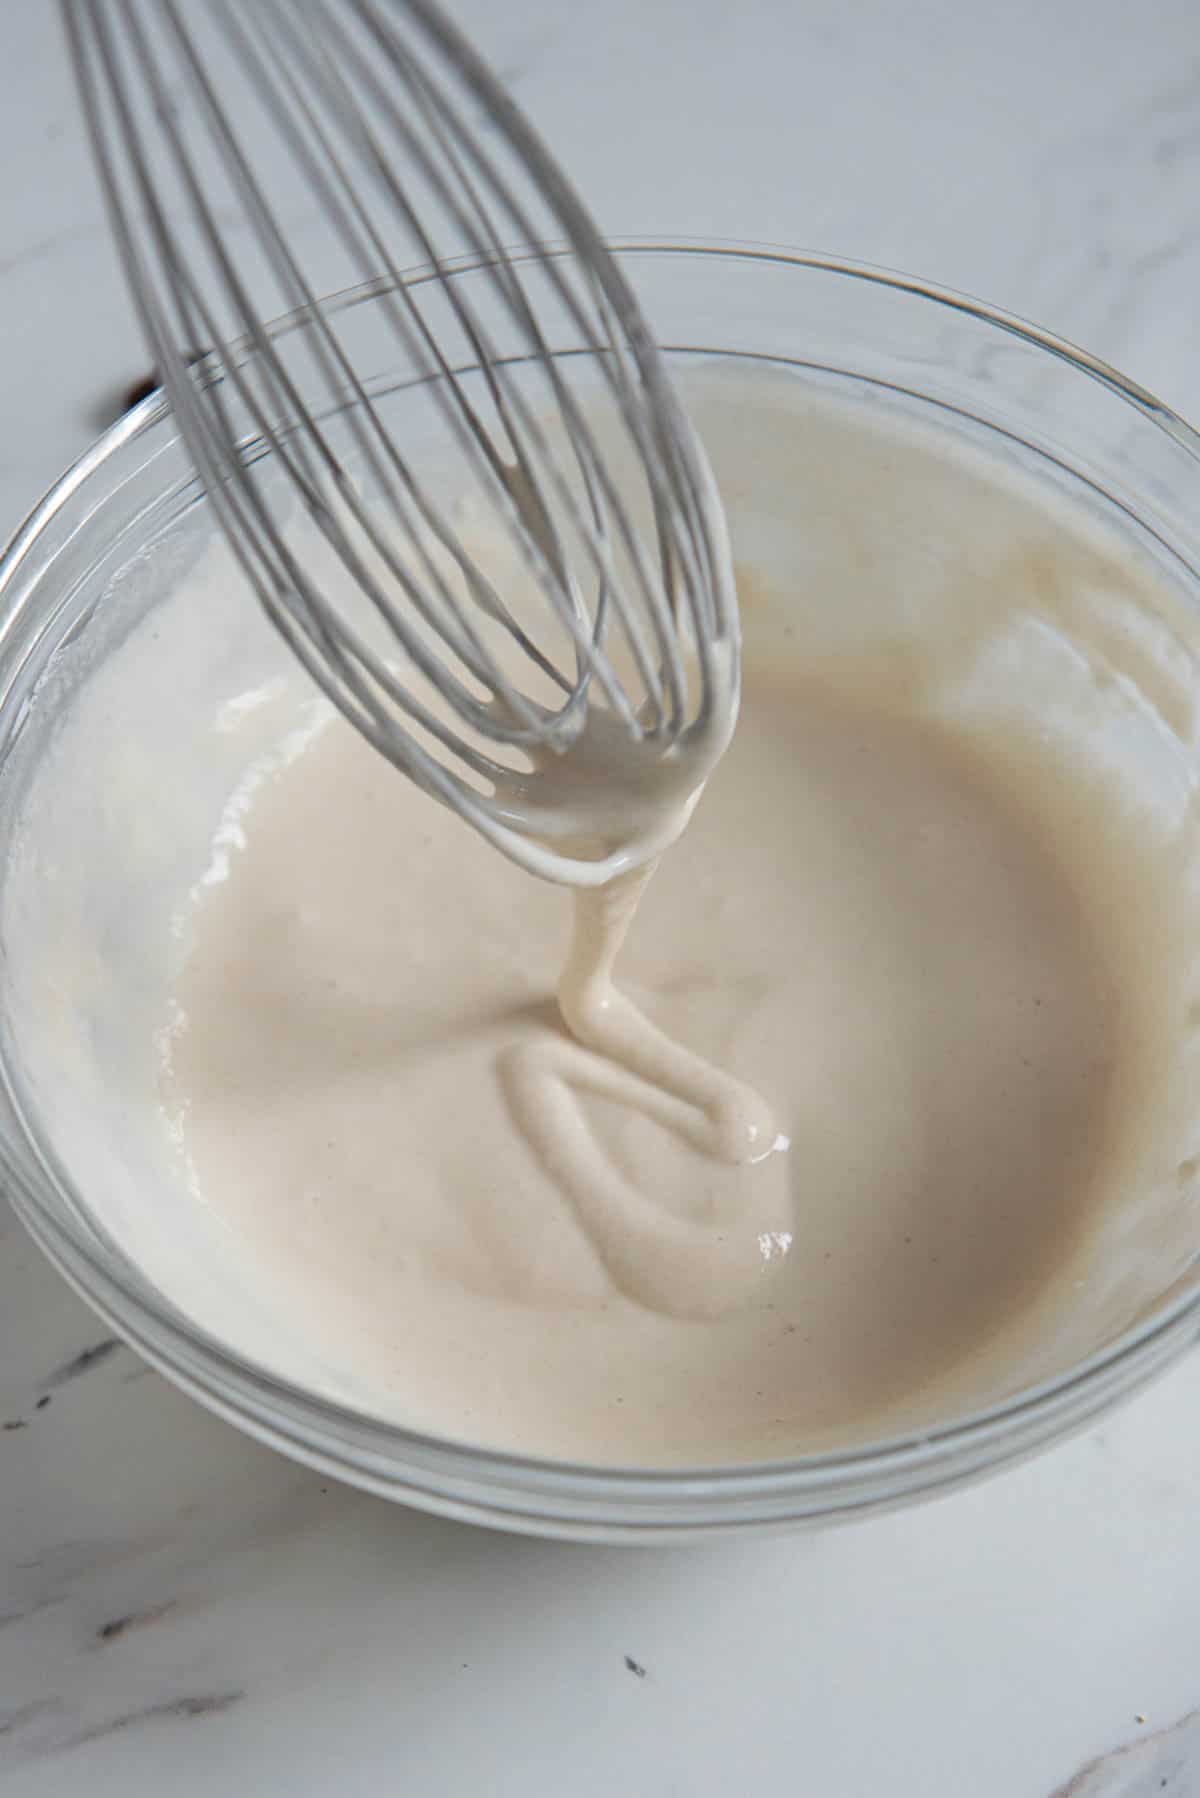 whisking flour and water to make paste for hot cross bun recipe.